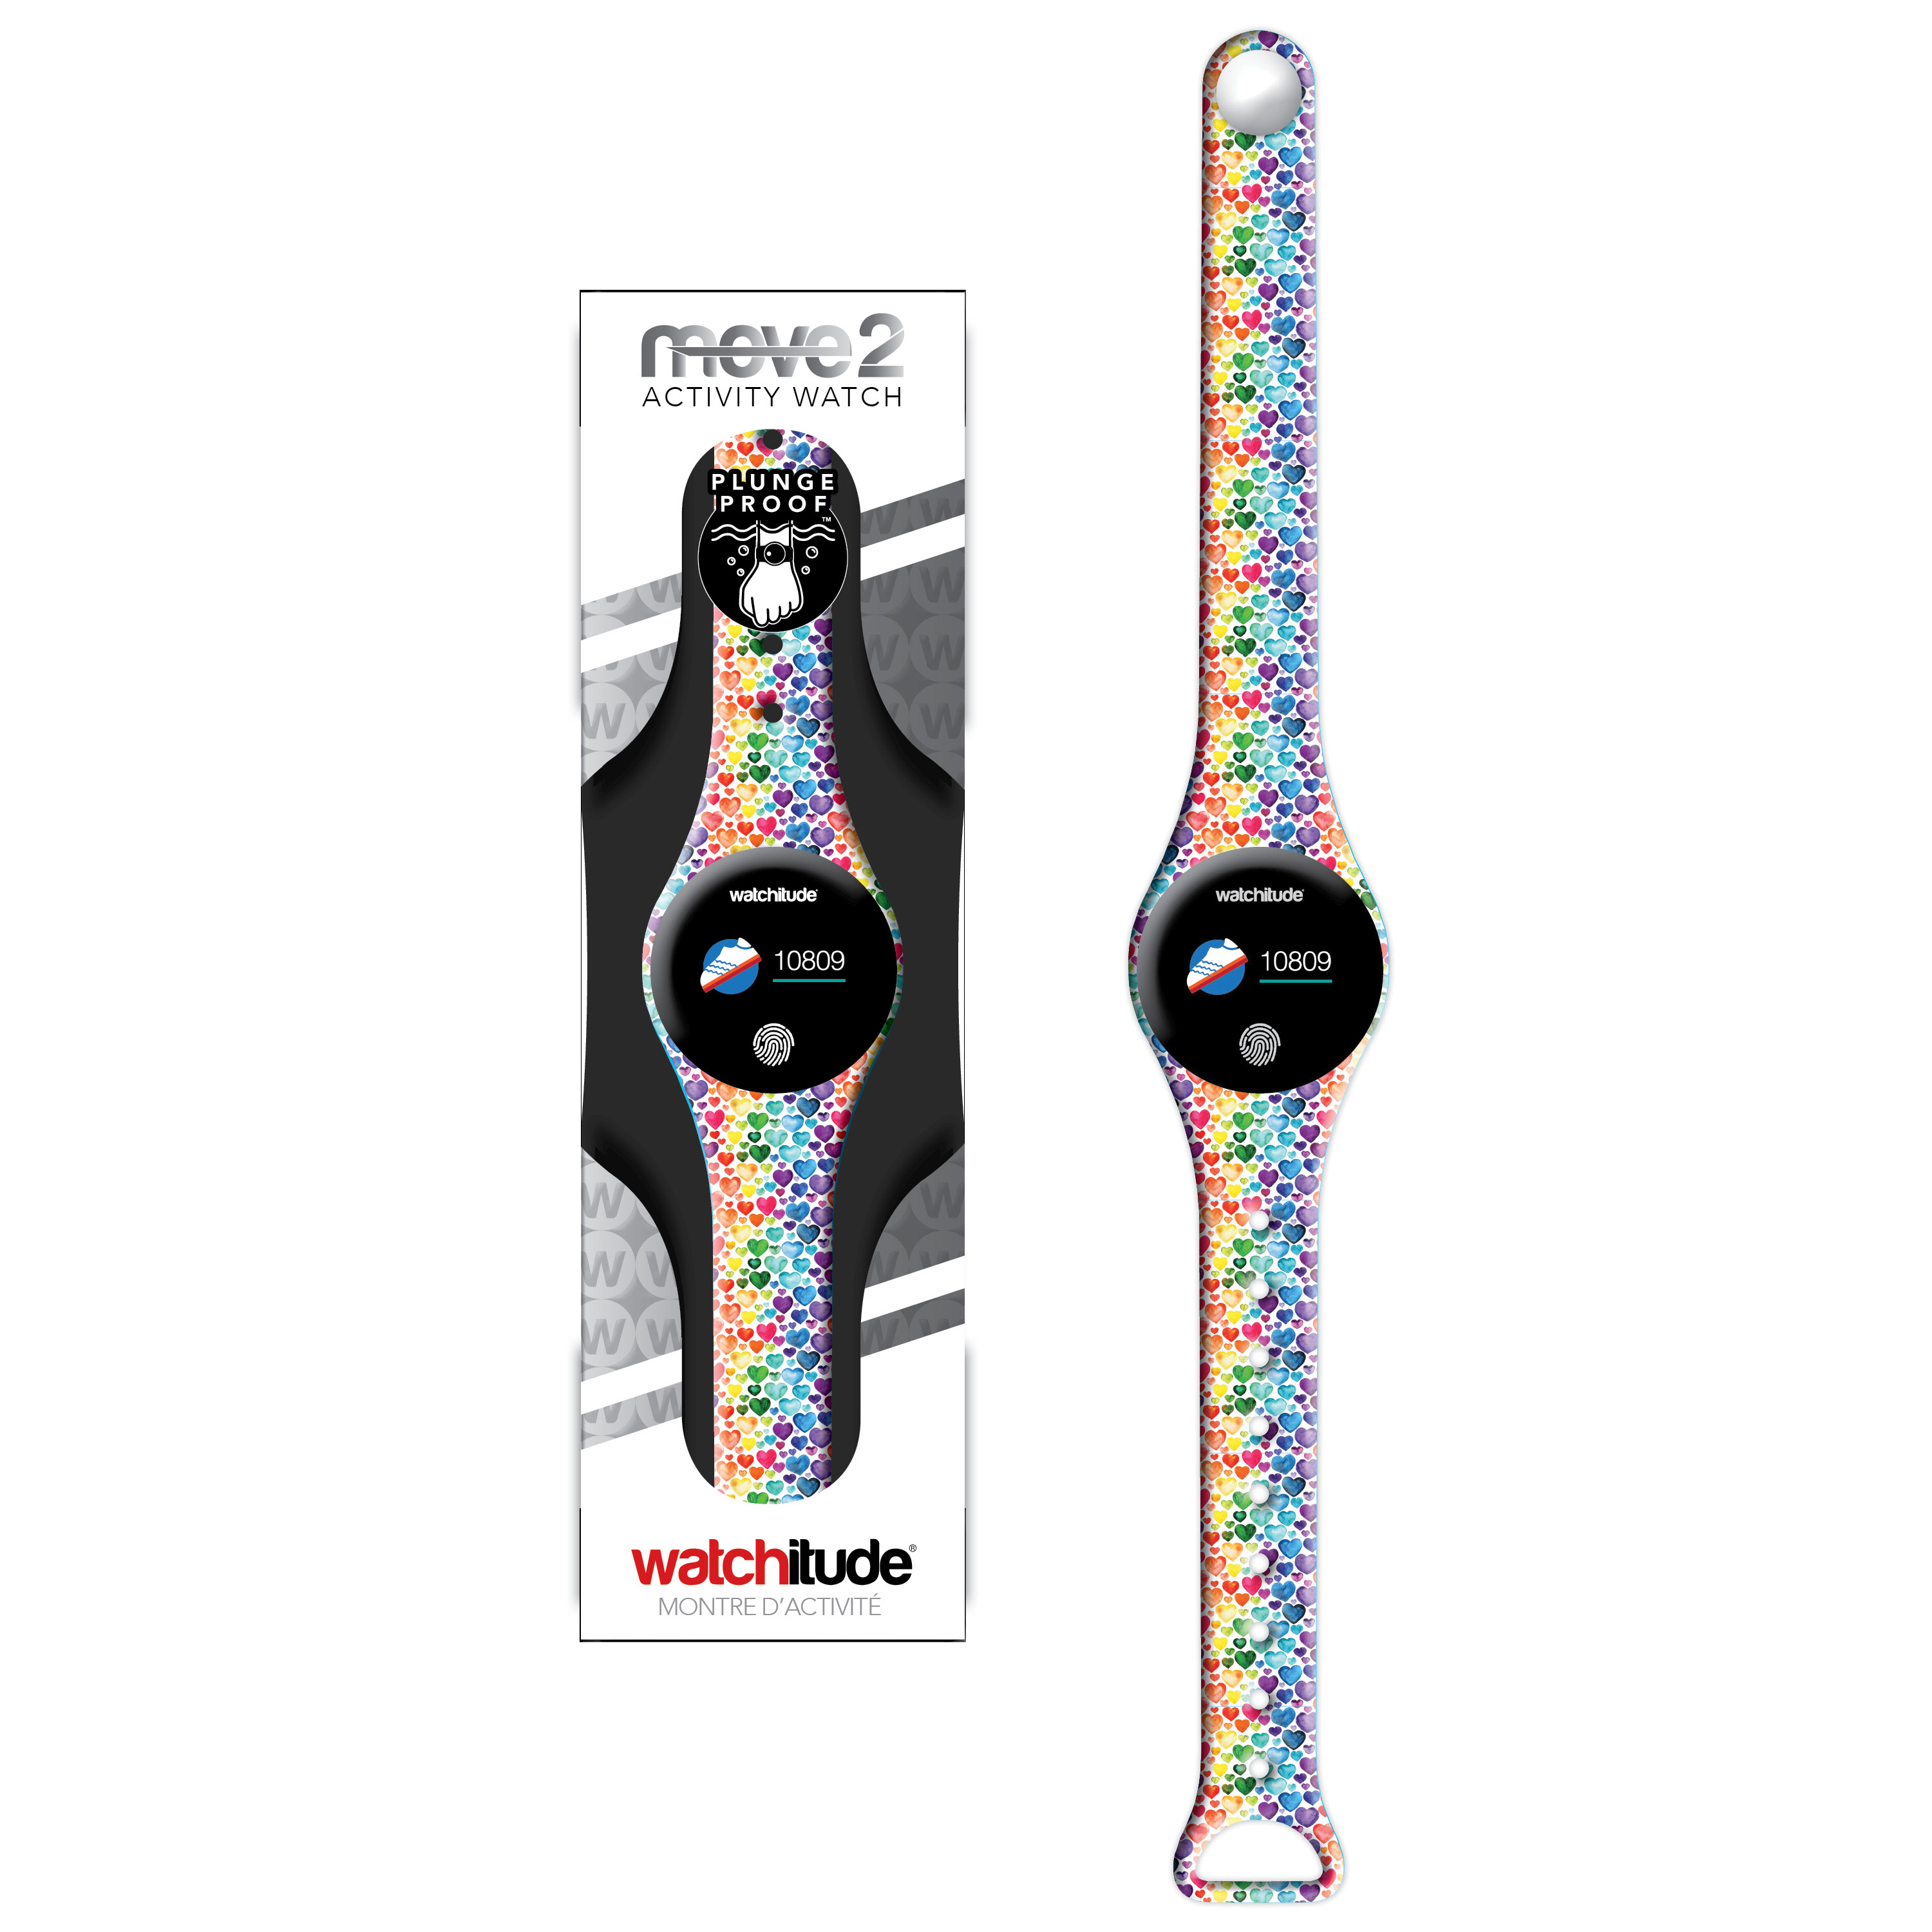 Rainbow Hearts - Watchitude Move 2 - Kids Activity Plunge Proof Watch image number 1